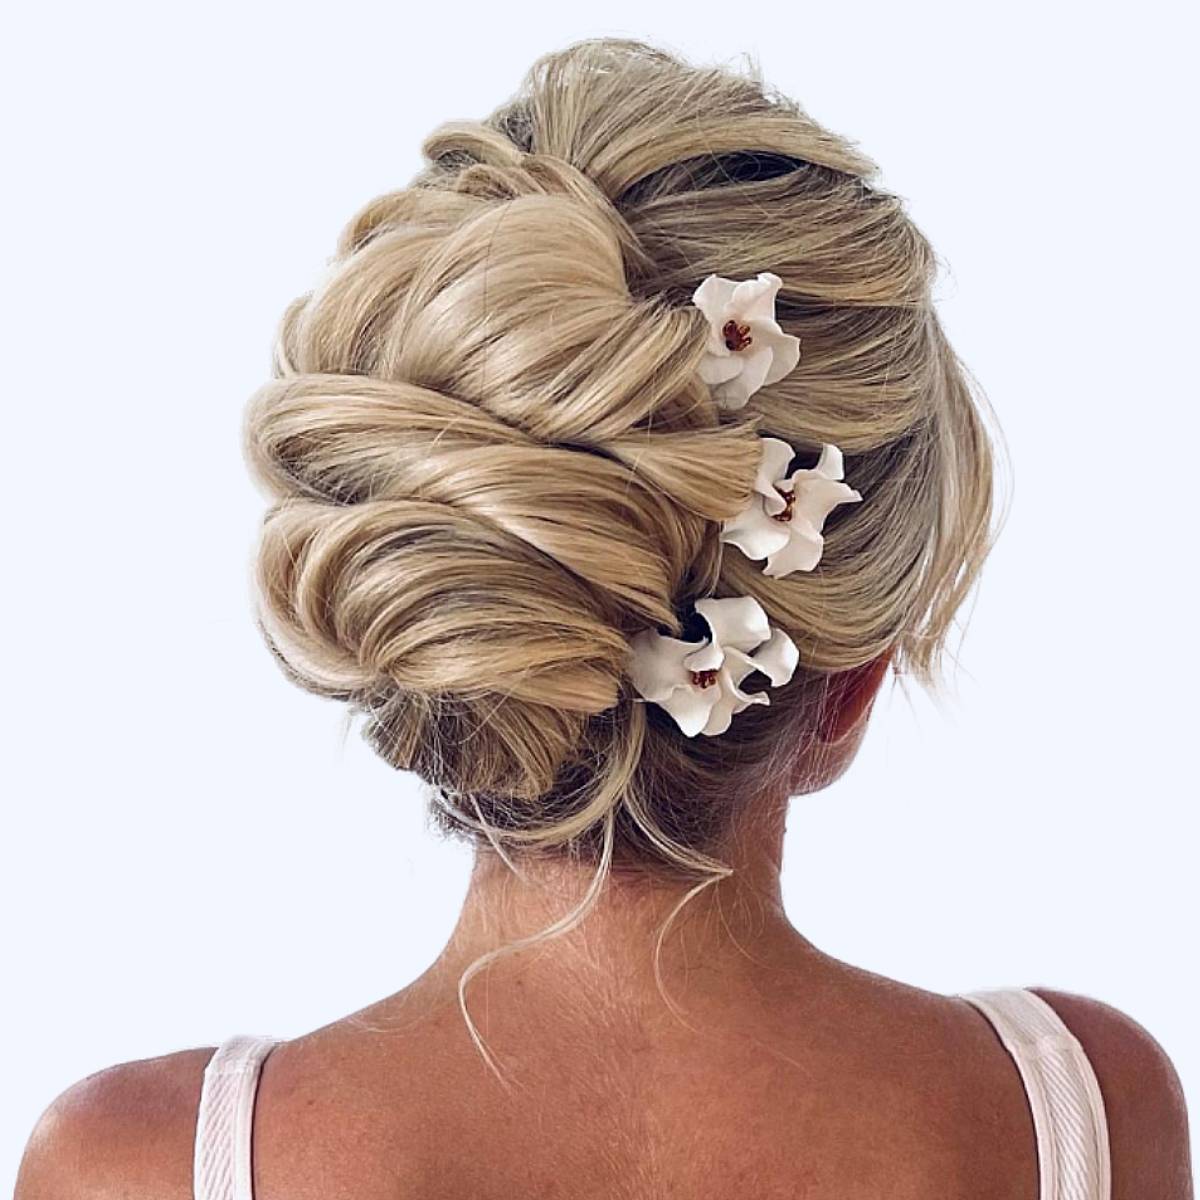 Best Wedding Hairstyles To Make You Look More Gorgeous  Nykaas Beauty Book